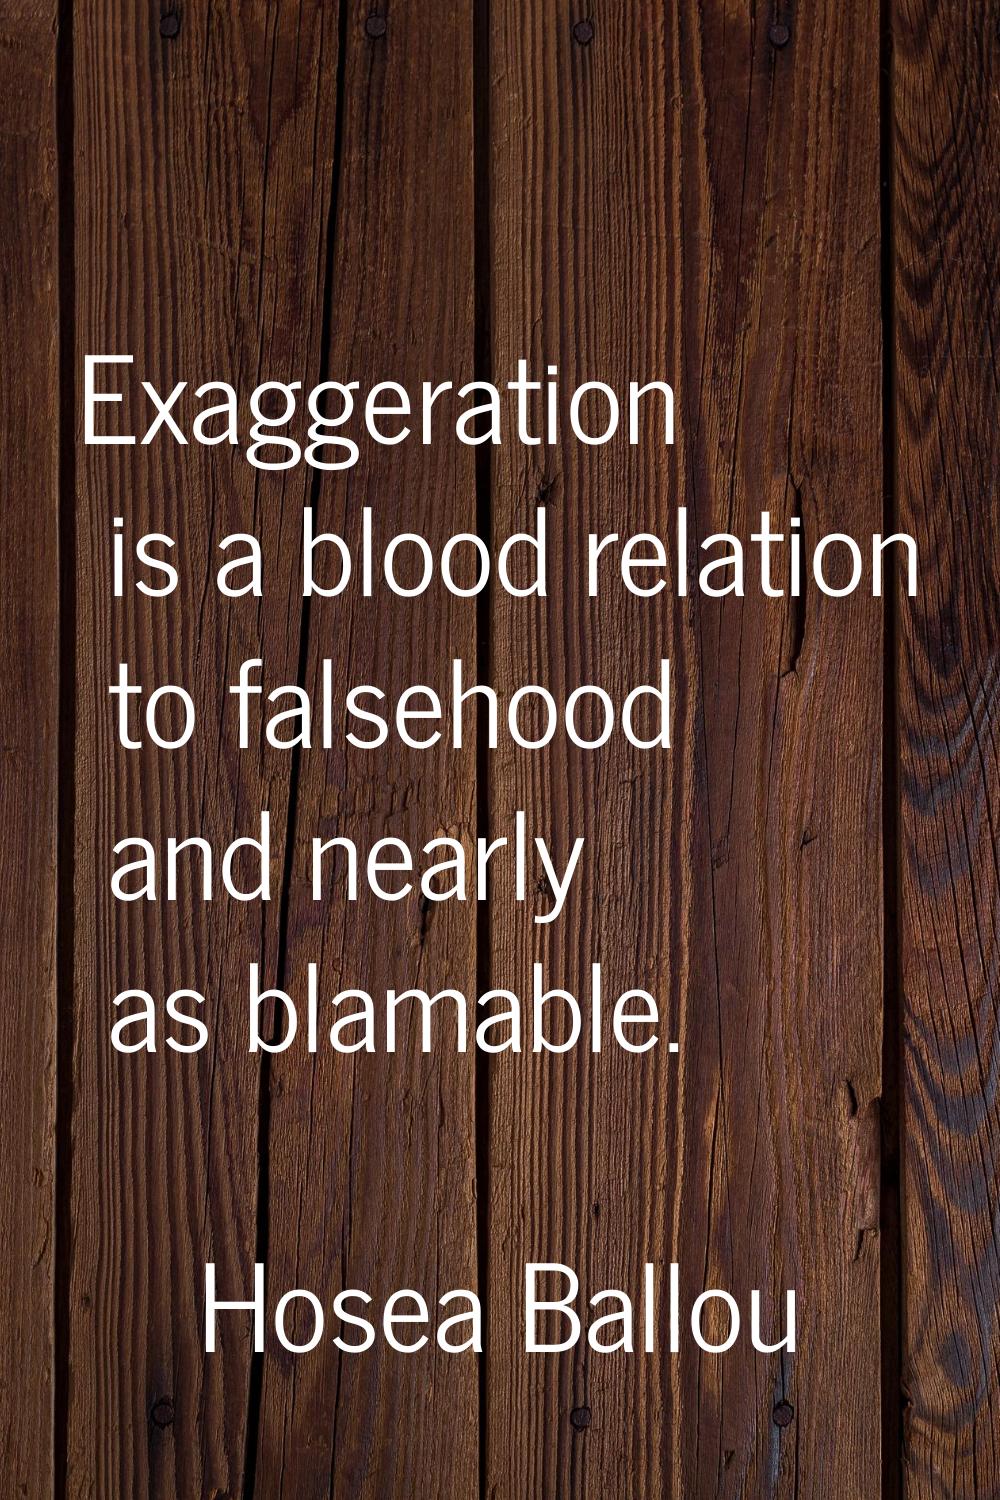 Exaggeration is a blood relation to falsehood and nearly as blamable.